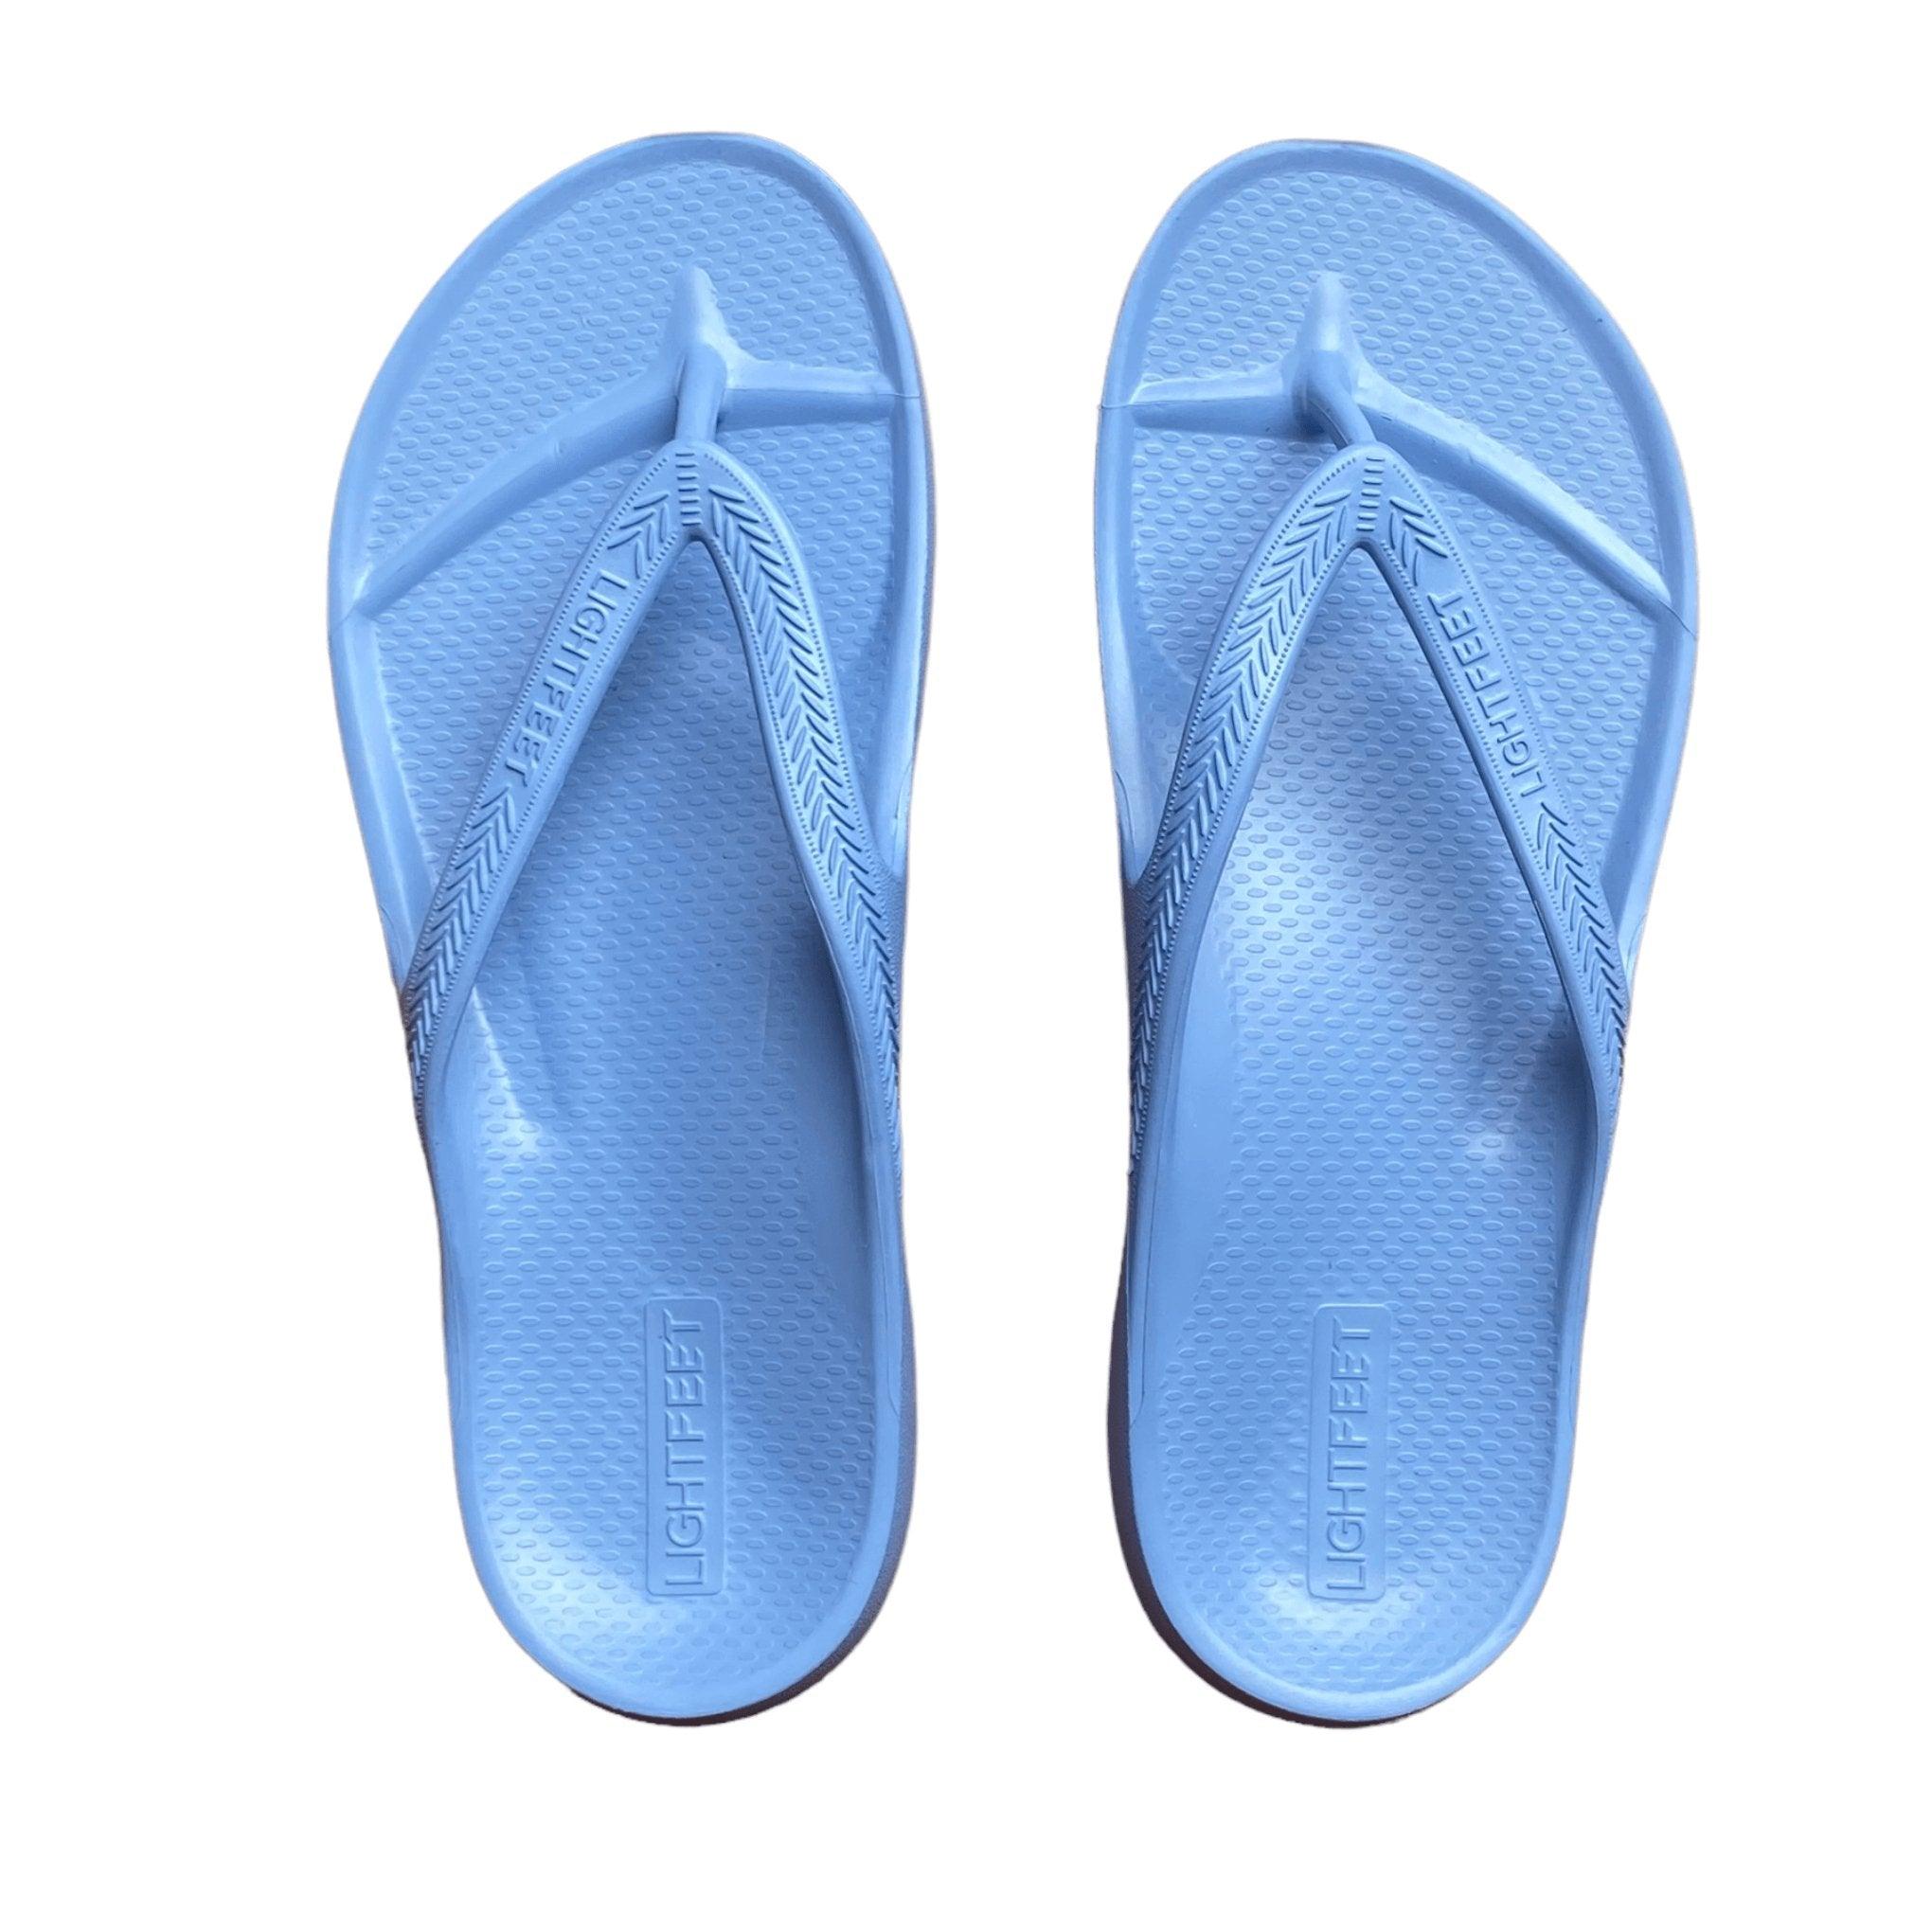 Lightfeet Revive Arch Support Thongs